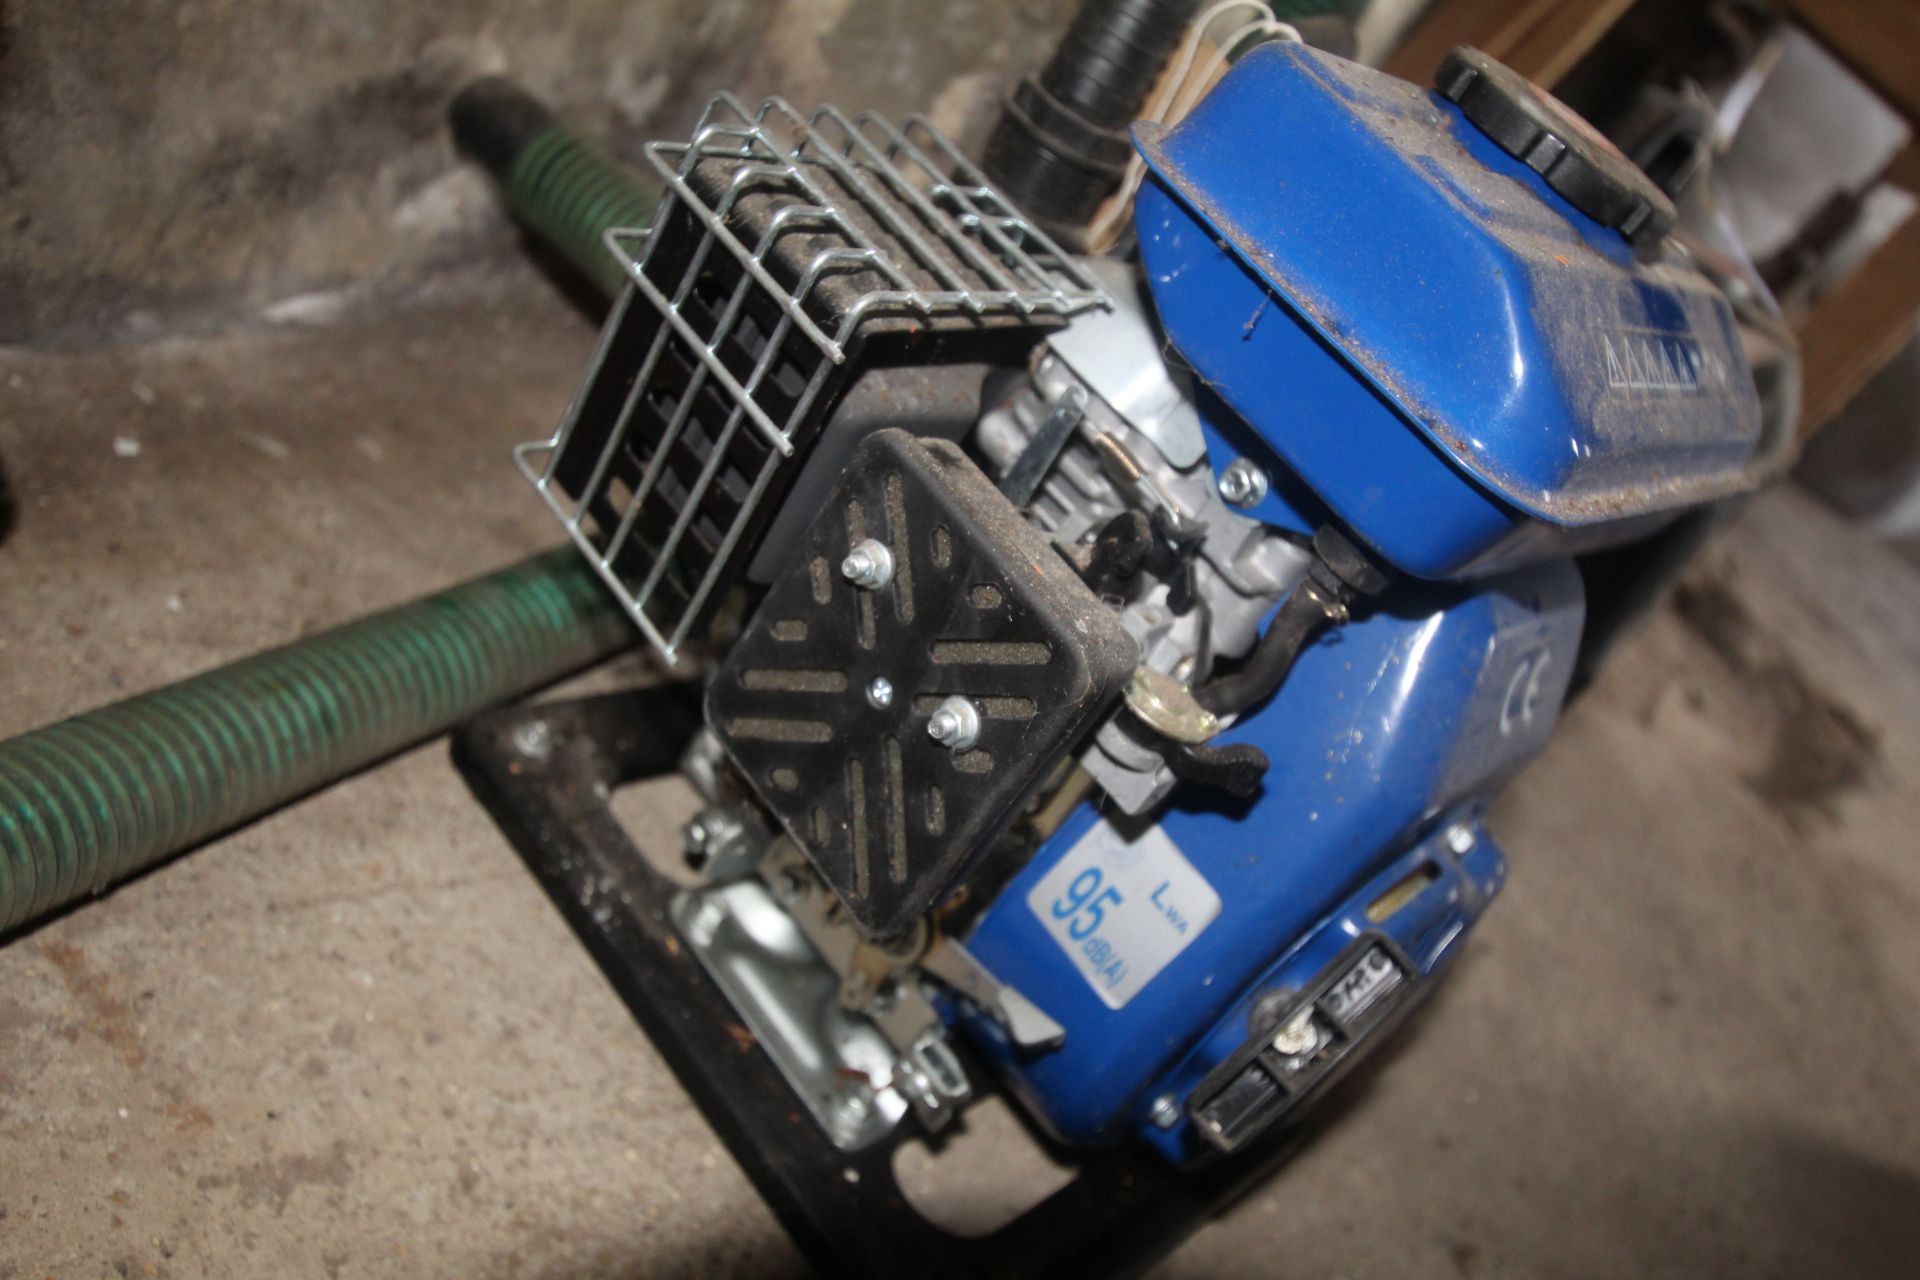 Draper Expert petrol driven water pump with suction hose. - Image 4 of 4